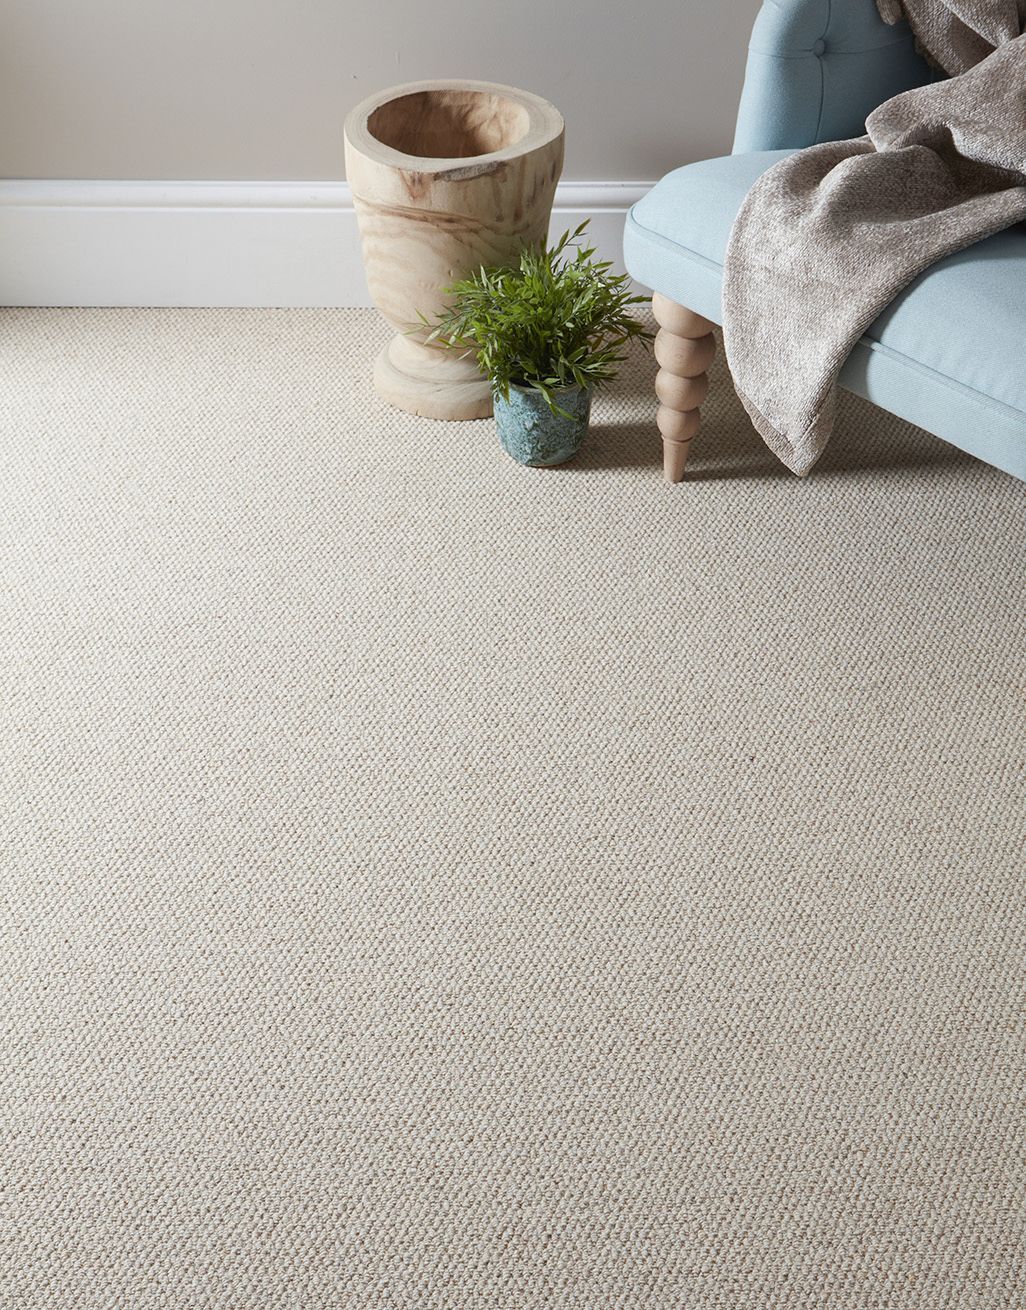 Flooring Carpeting The Ultimate Guide to Stylish and Practical Carpet Options